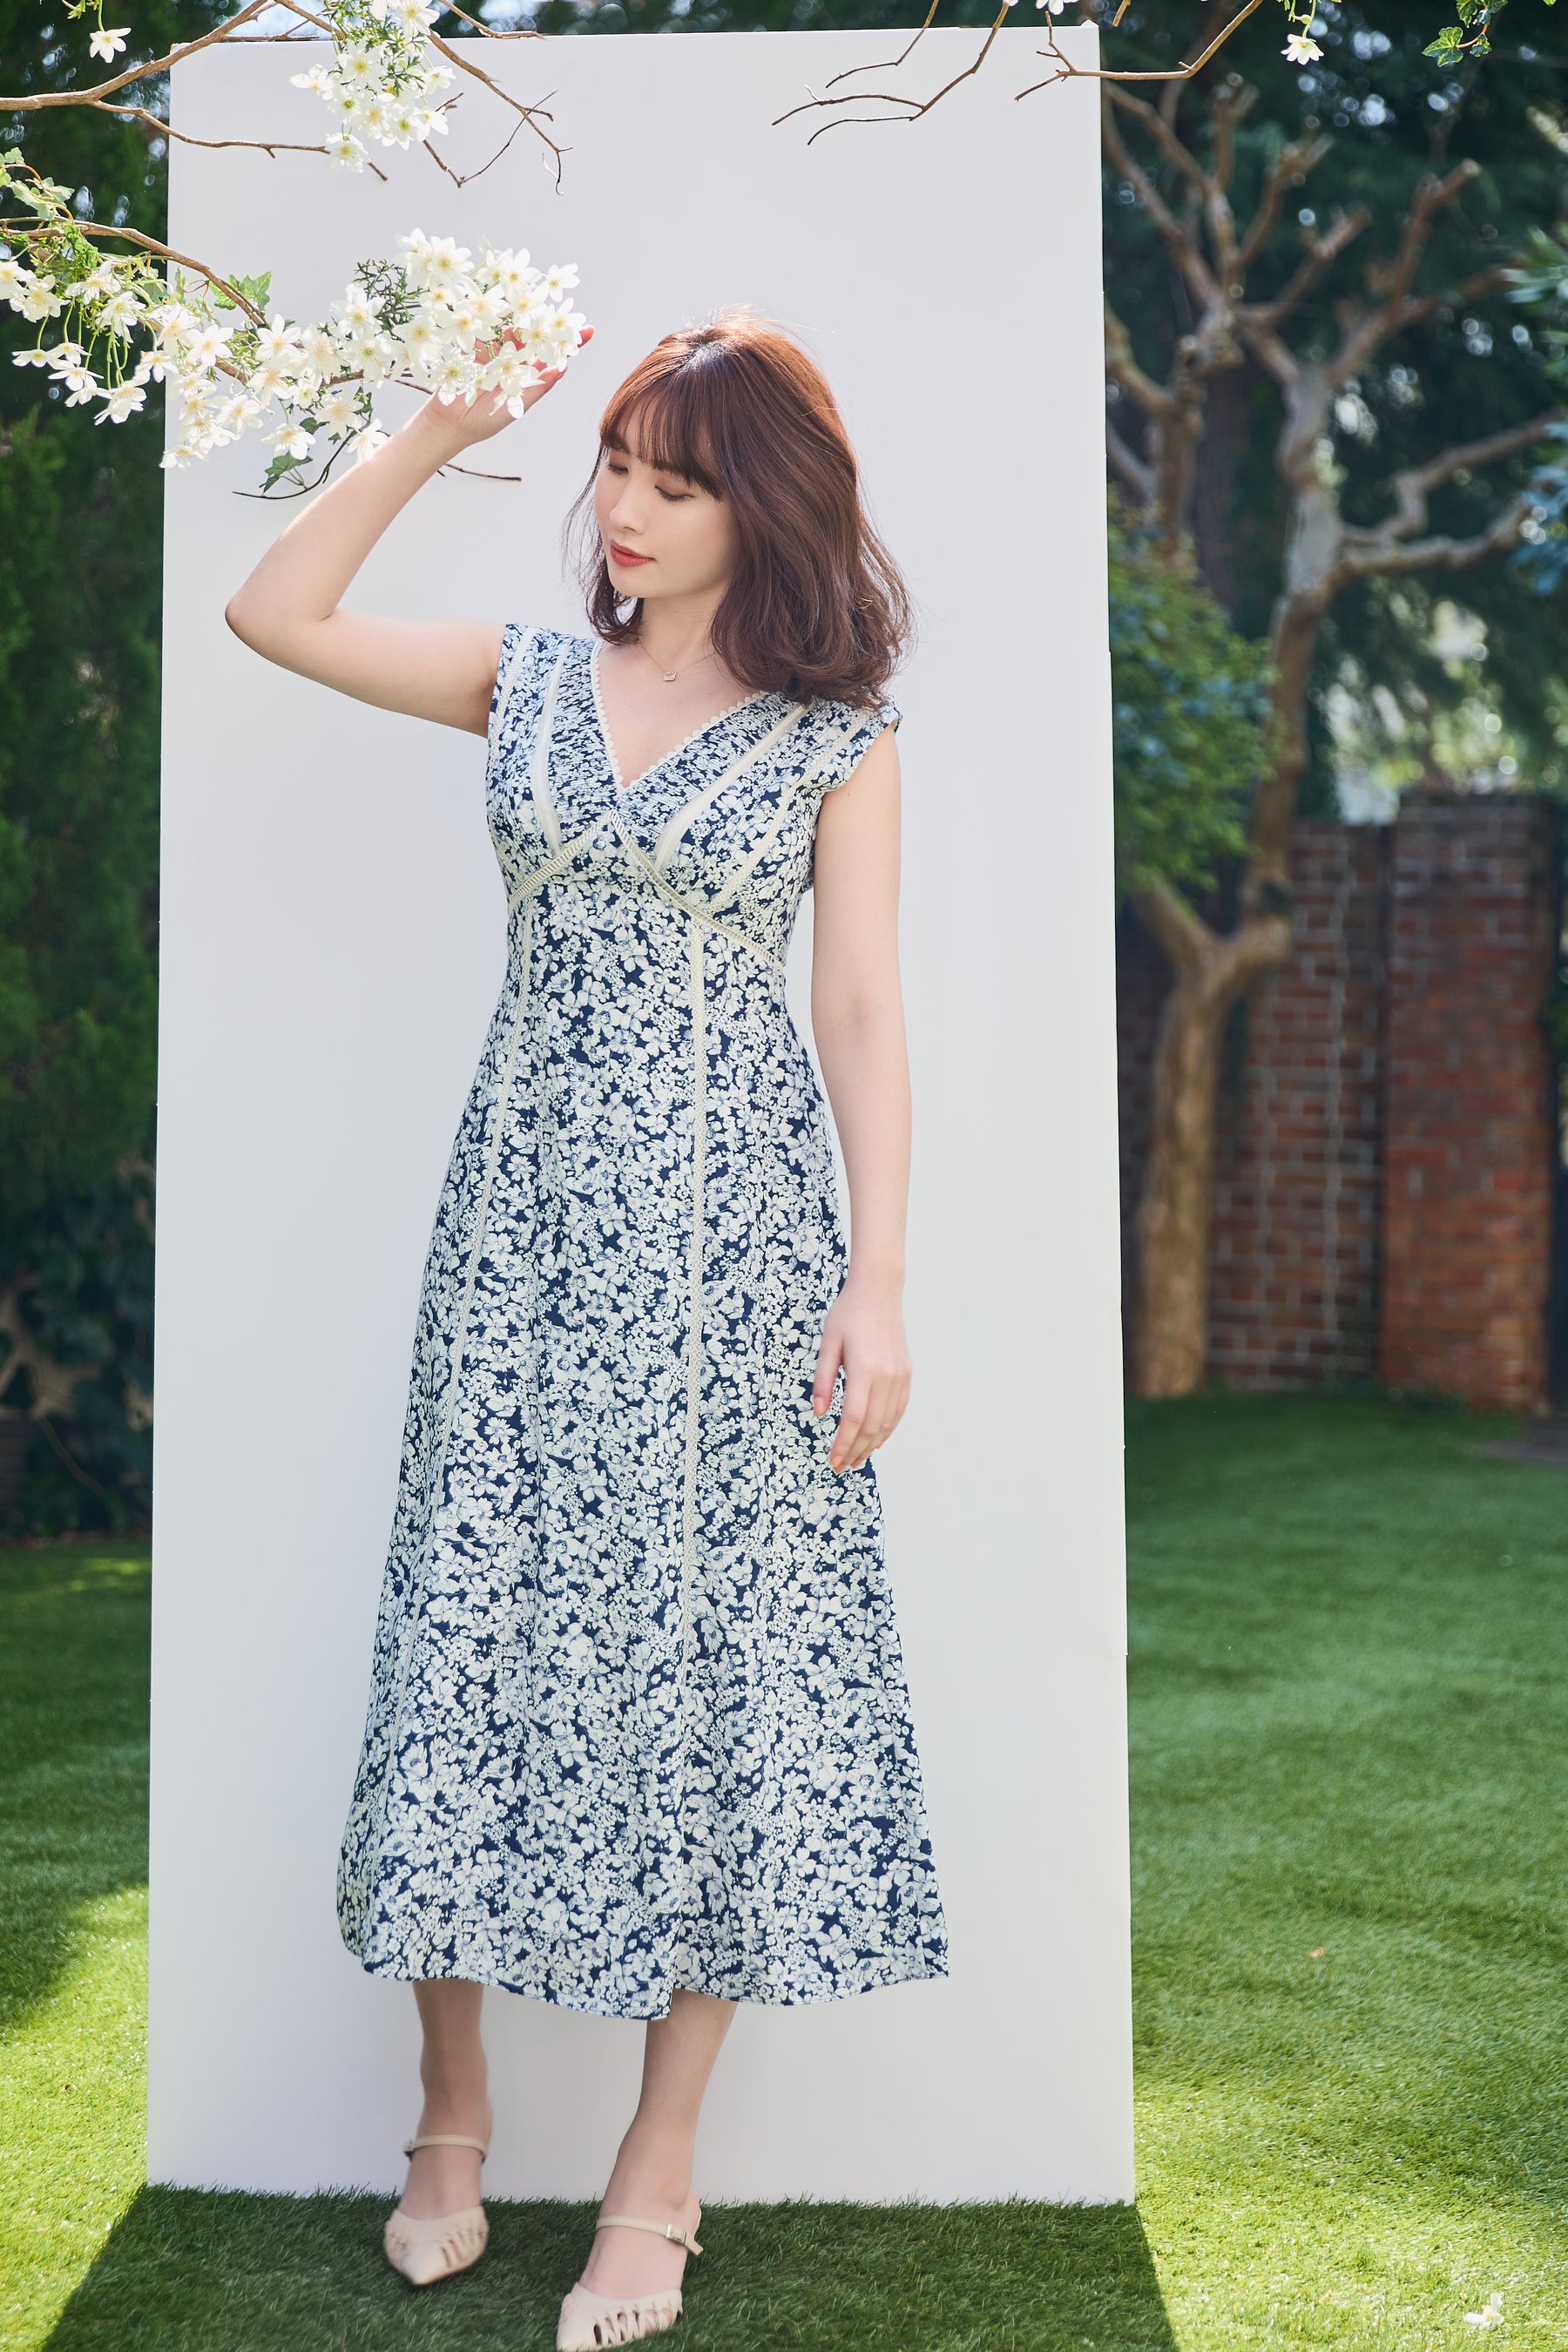 Herlipto Lace Trimmed Floral Dressフローラル